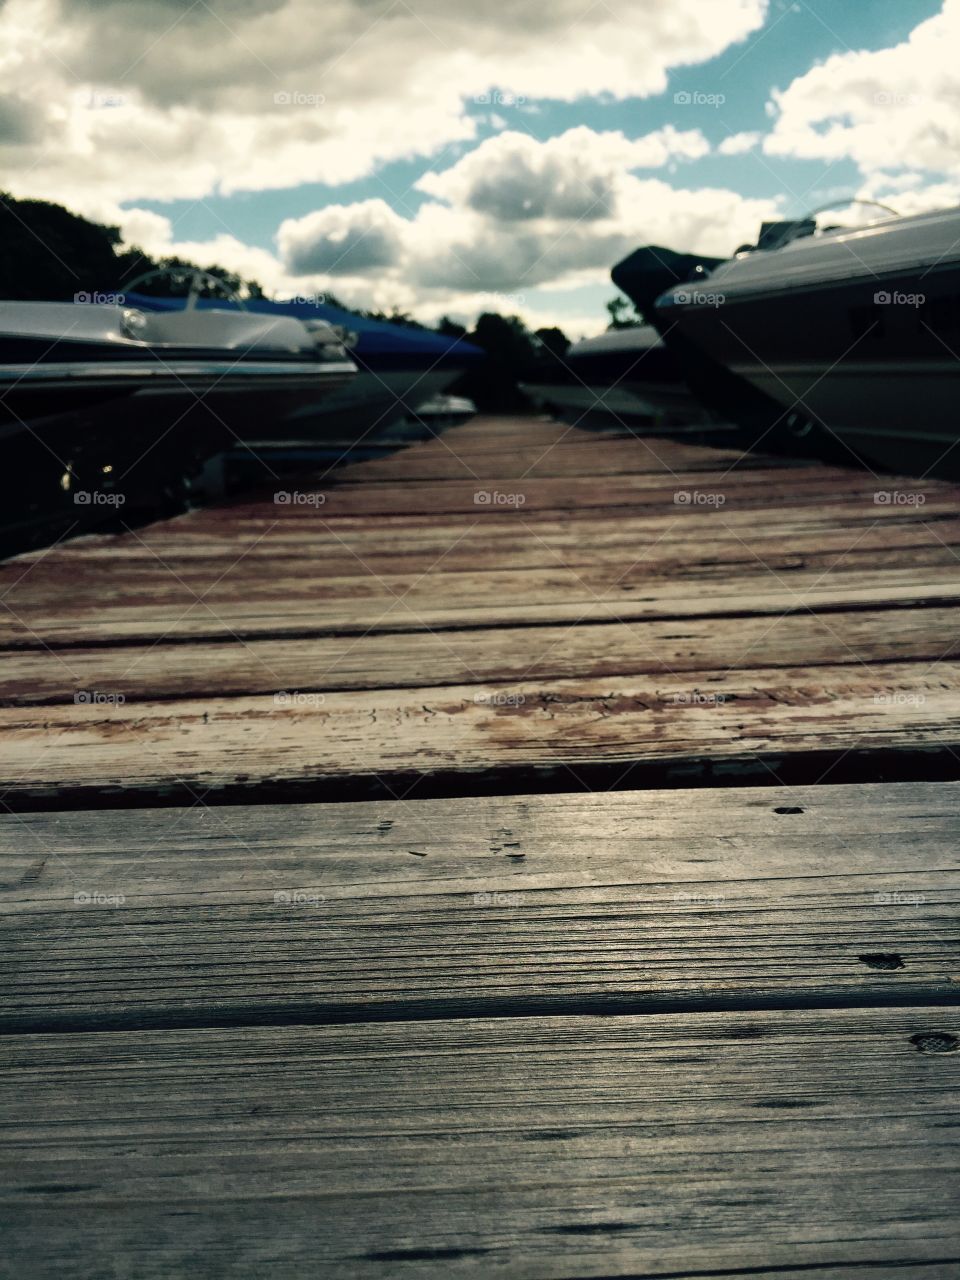 Pier of Boats 